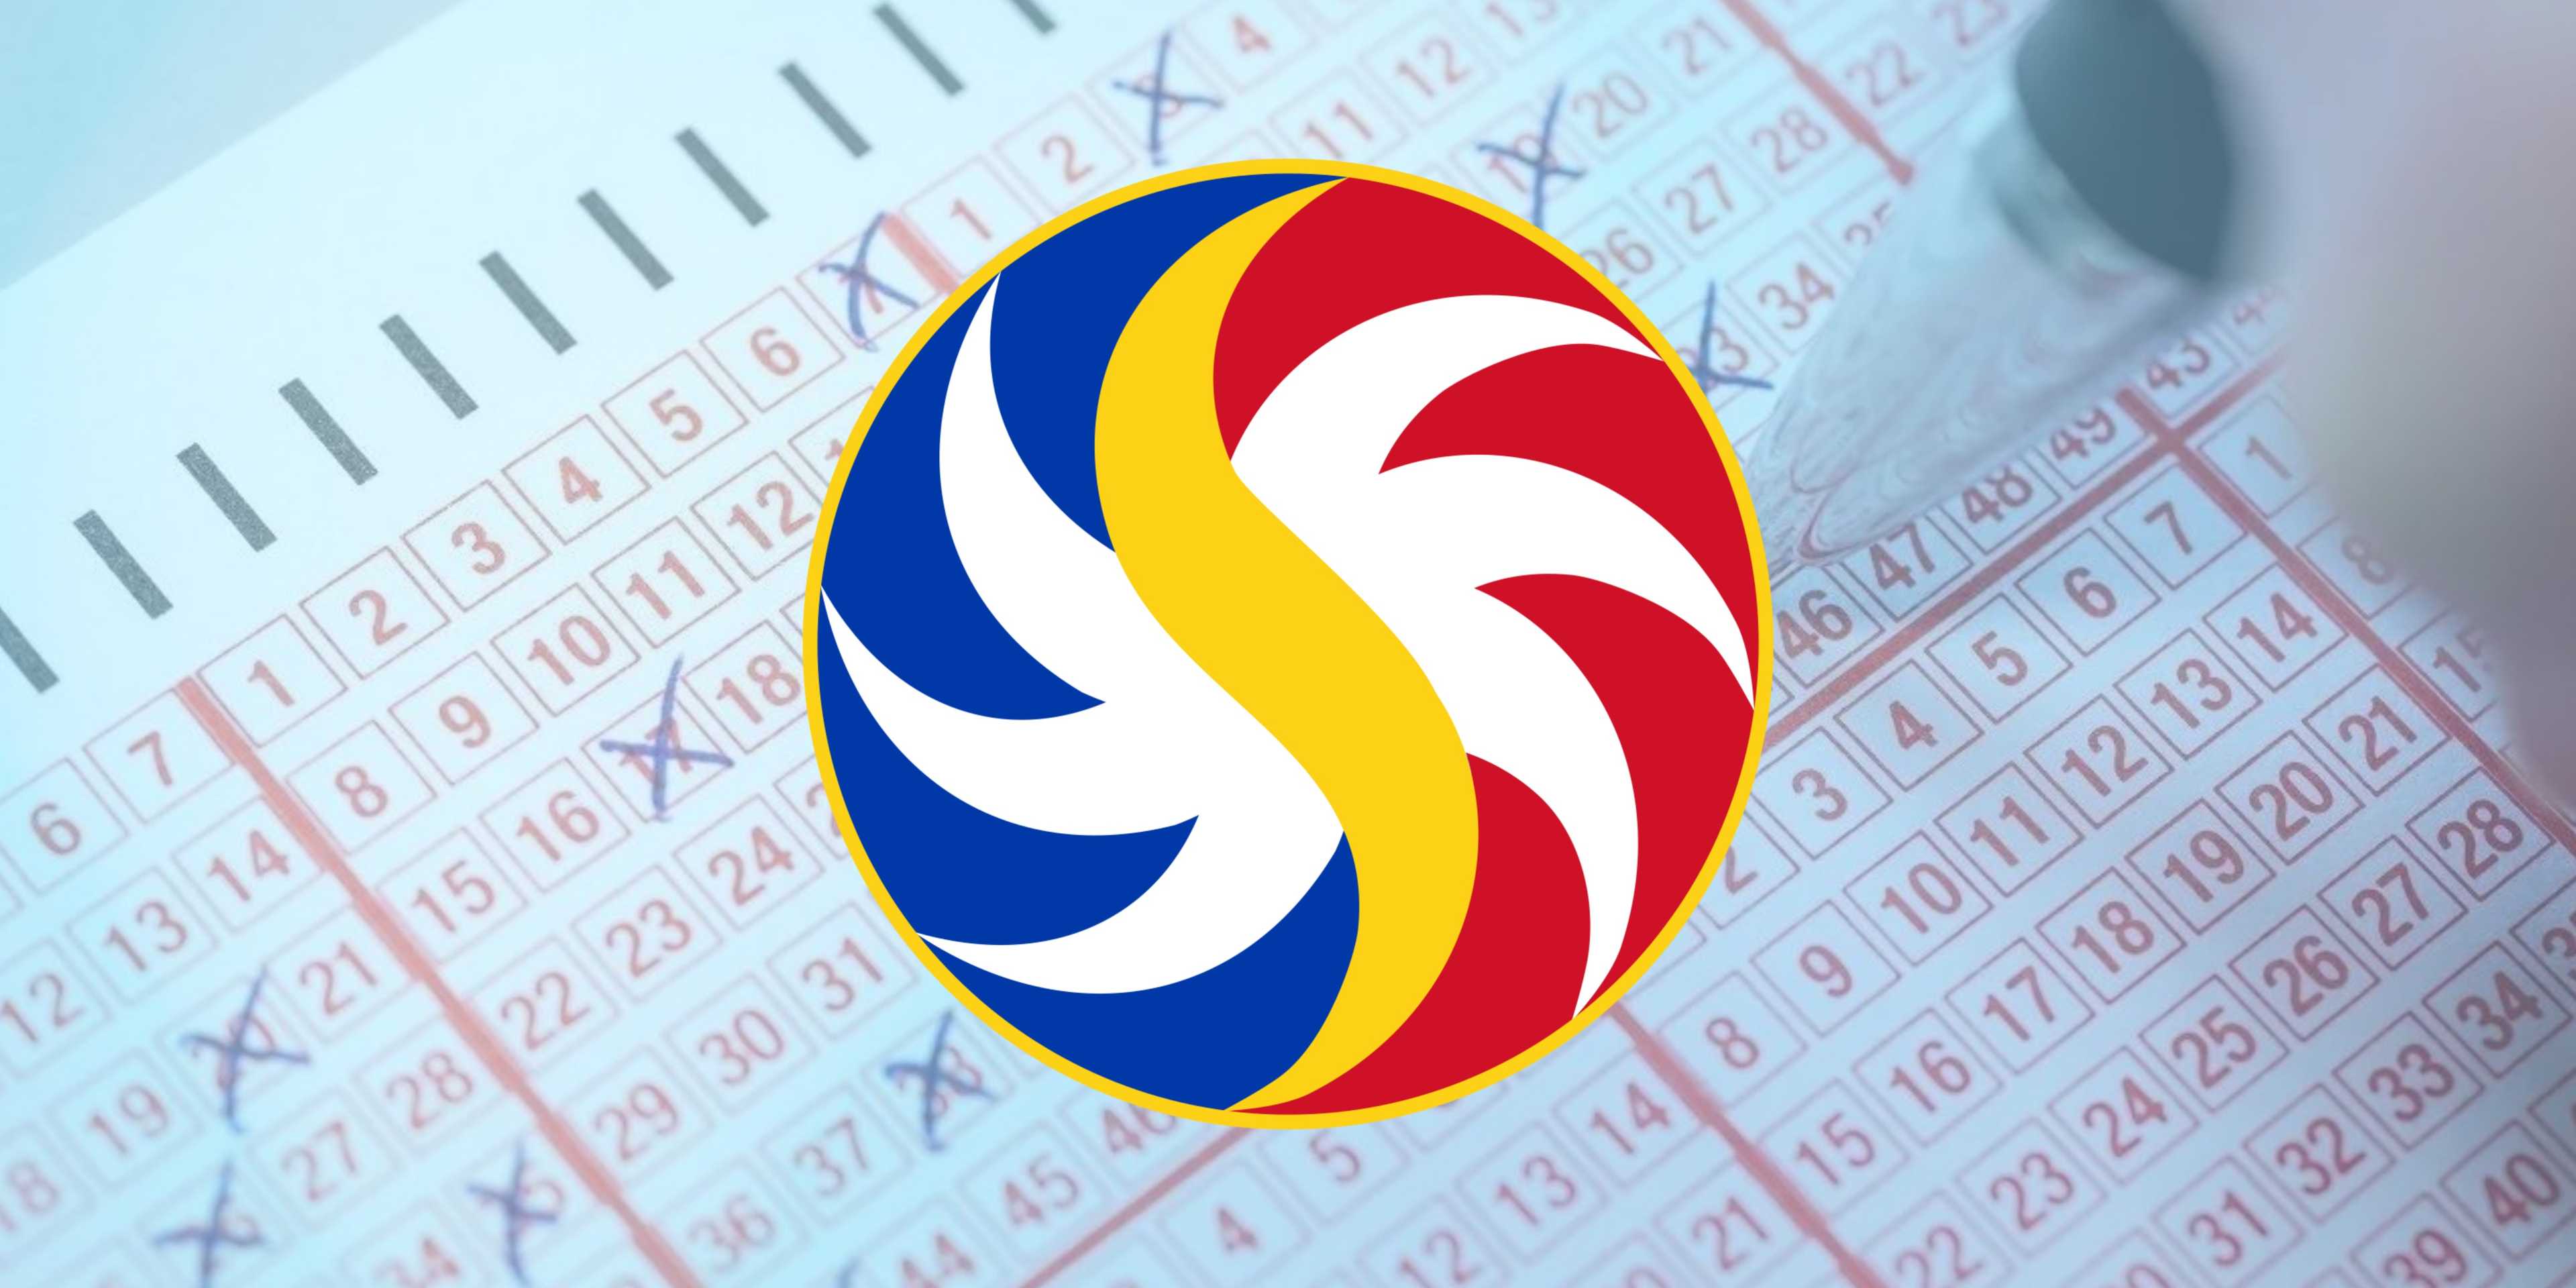 PCSO Lotto Draw Results on Wednesday, February 7